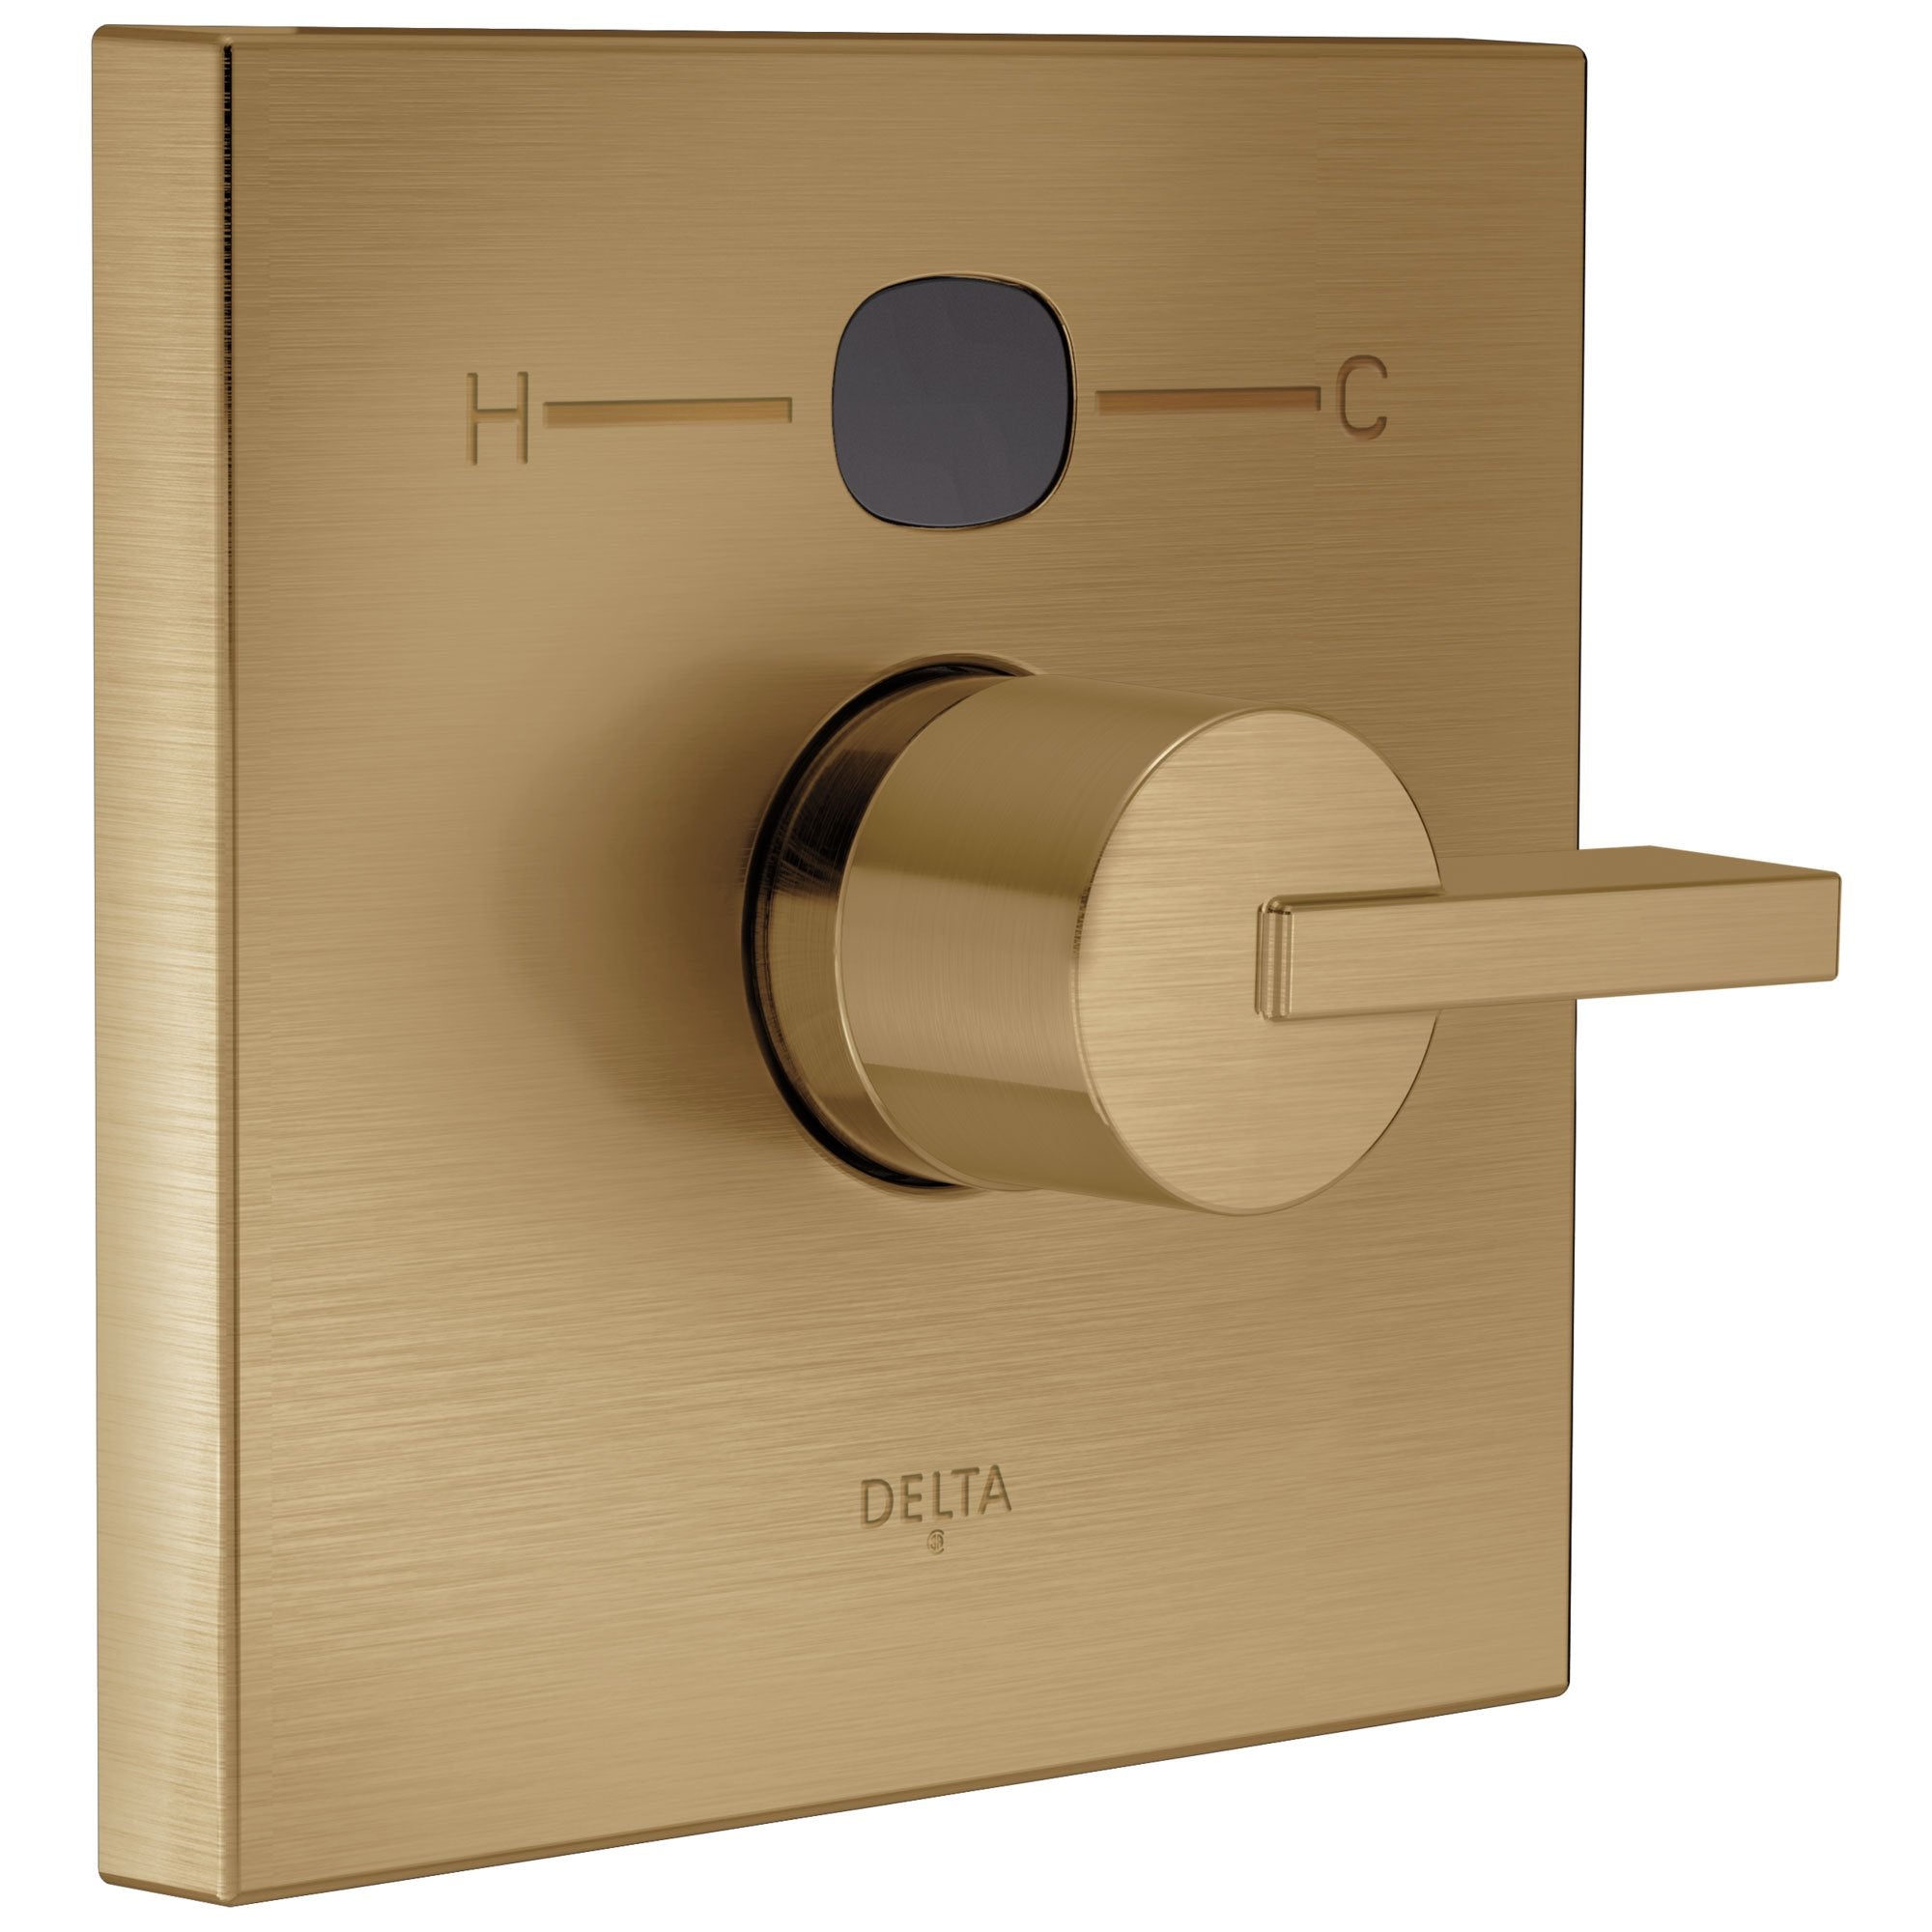 Delta Champagne Bronze Vero Angular Modern 14 Series Digital Display Temp2O Square Shower Valve Control INCLUDES Single Handle and Valve with Stops D1638V